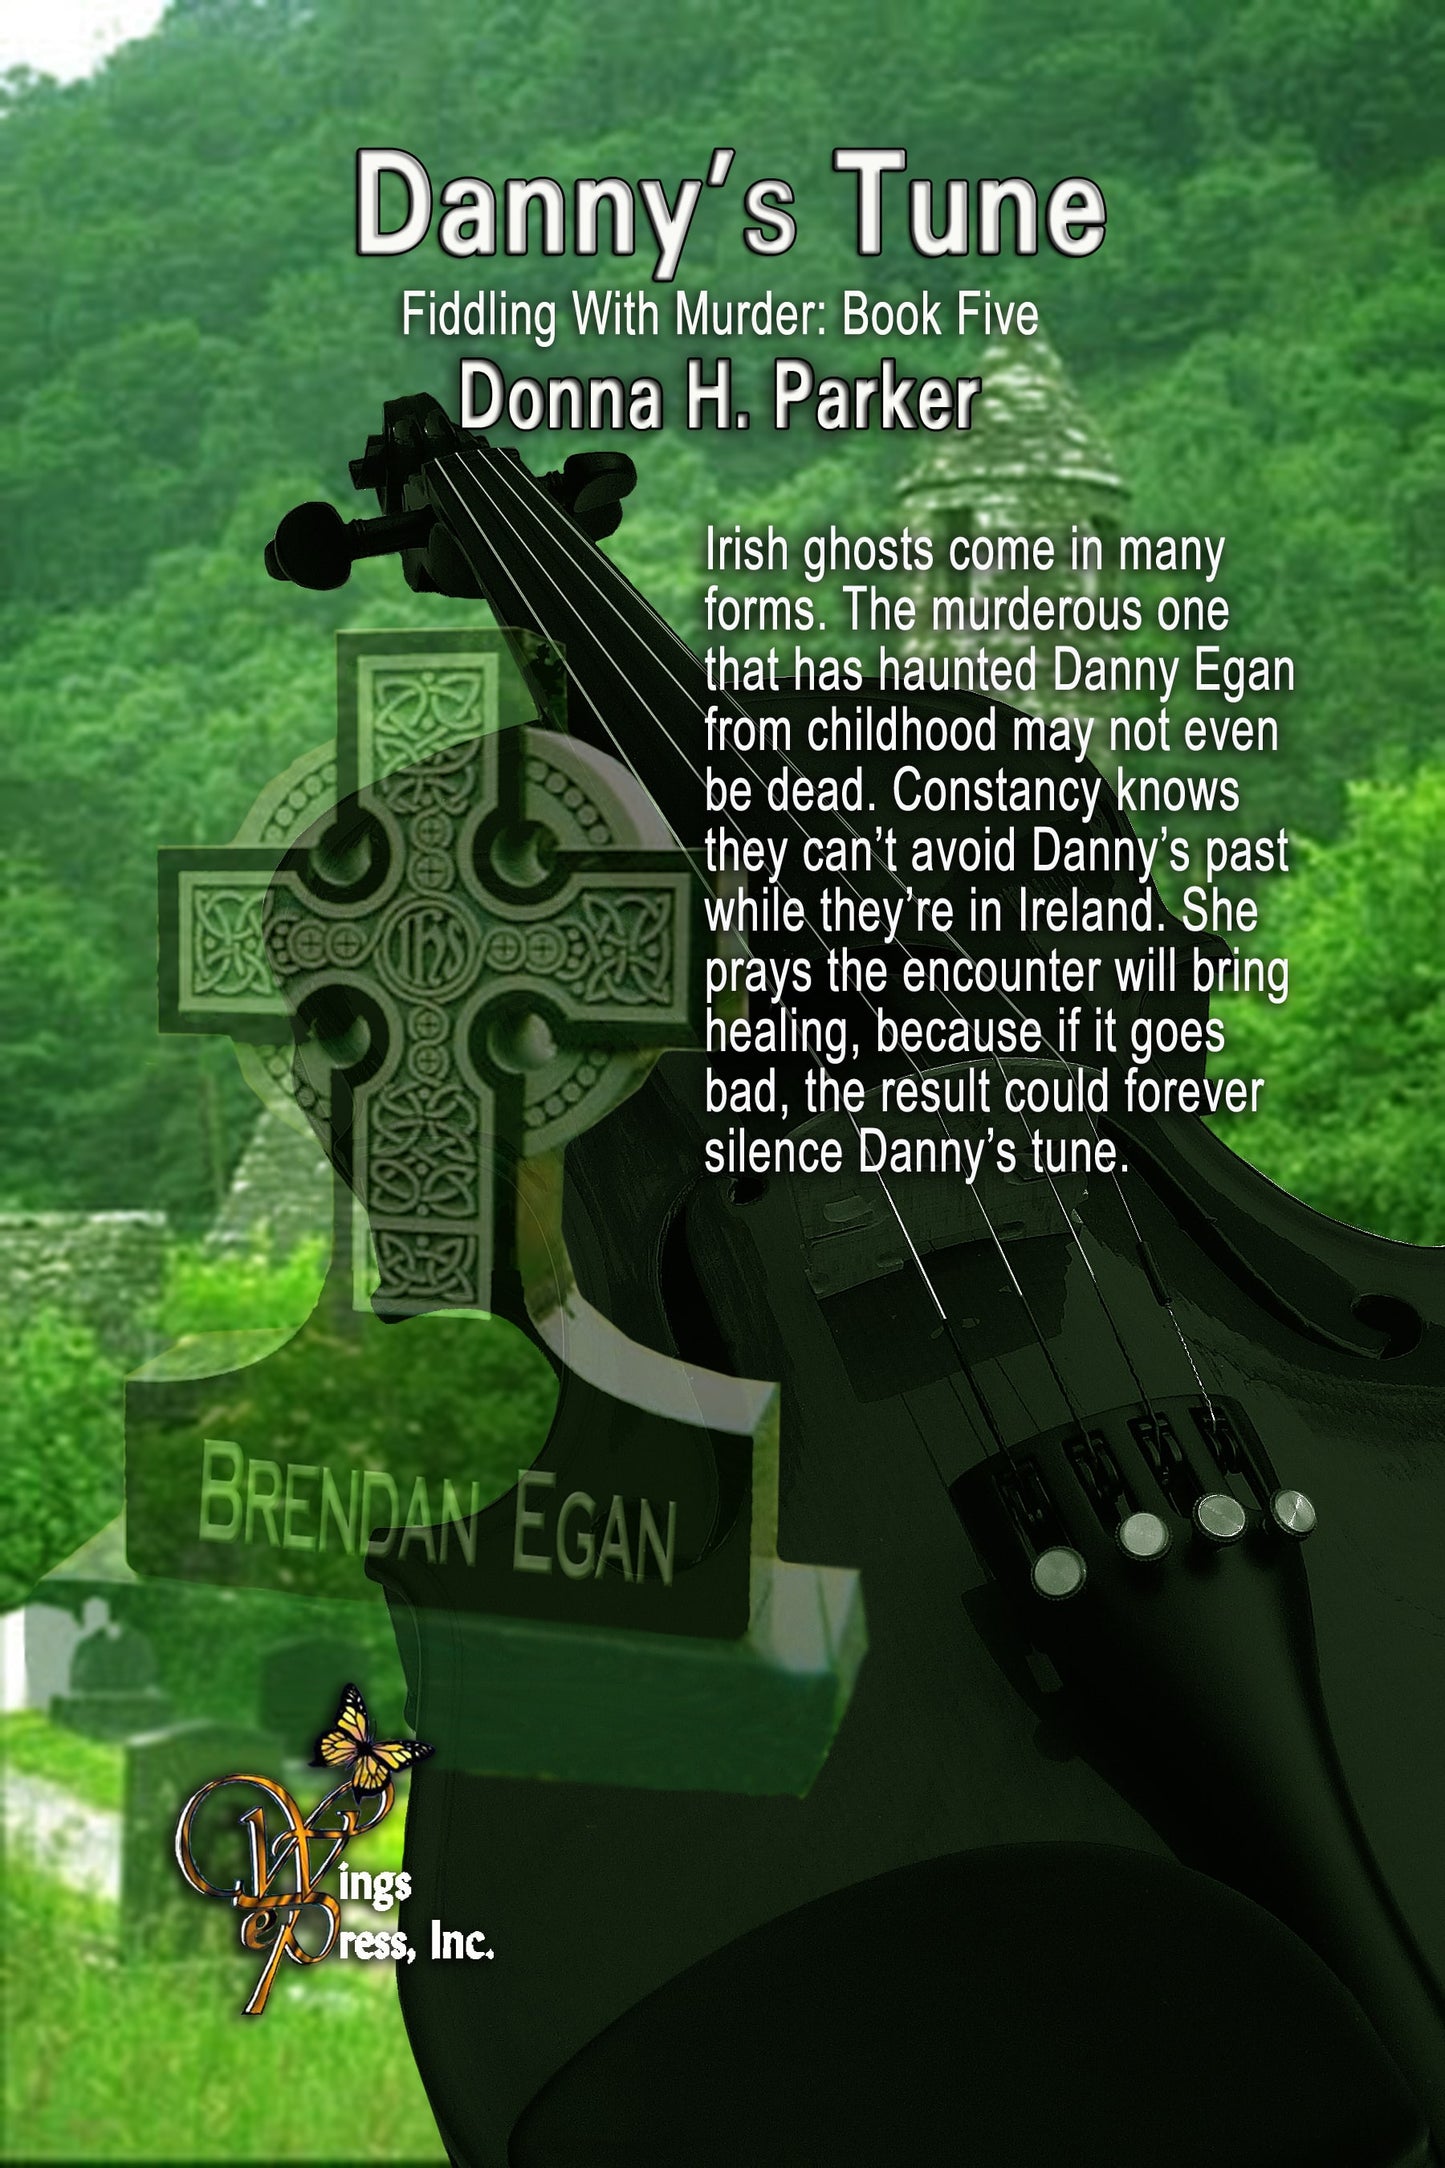 Danny's Tune (Fiddling With Murder Book 5)